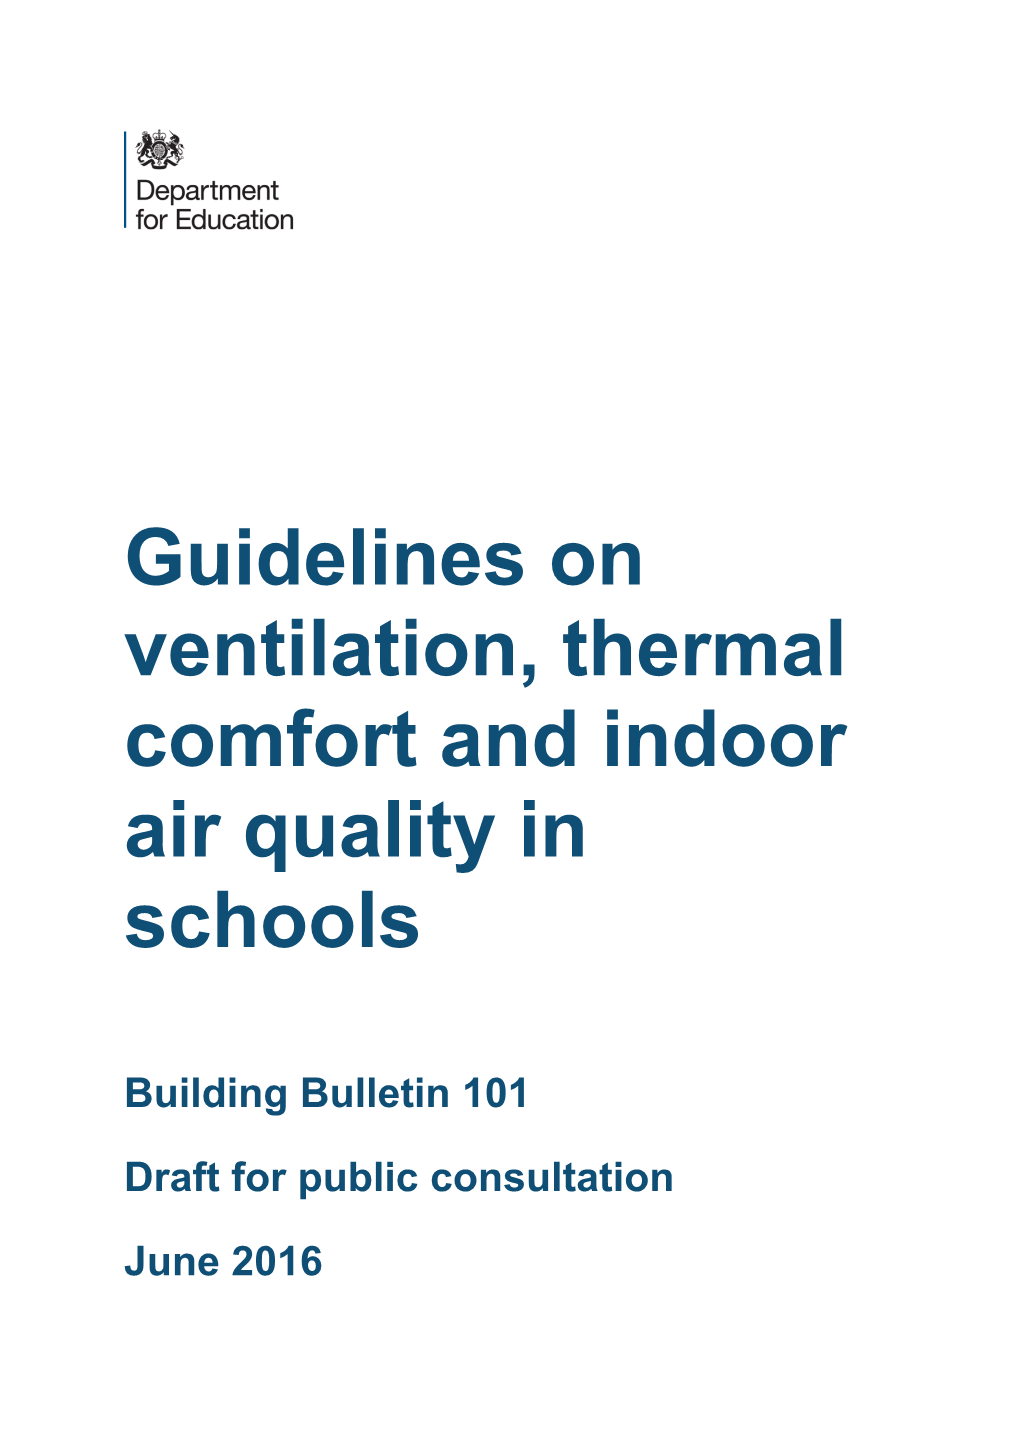 101, Guidelines on Ventilation, Thermal Comfort And